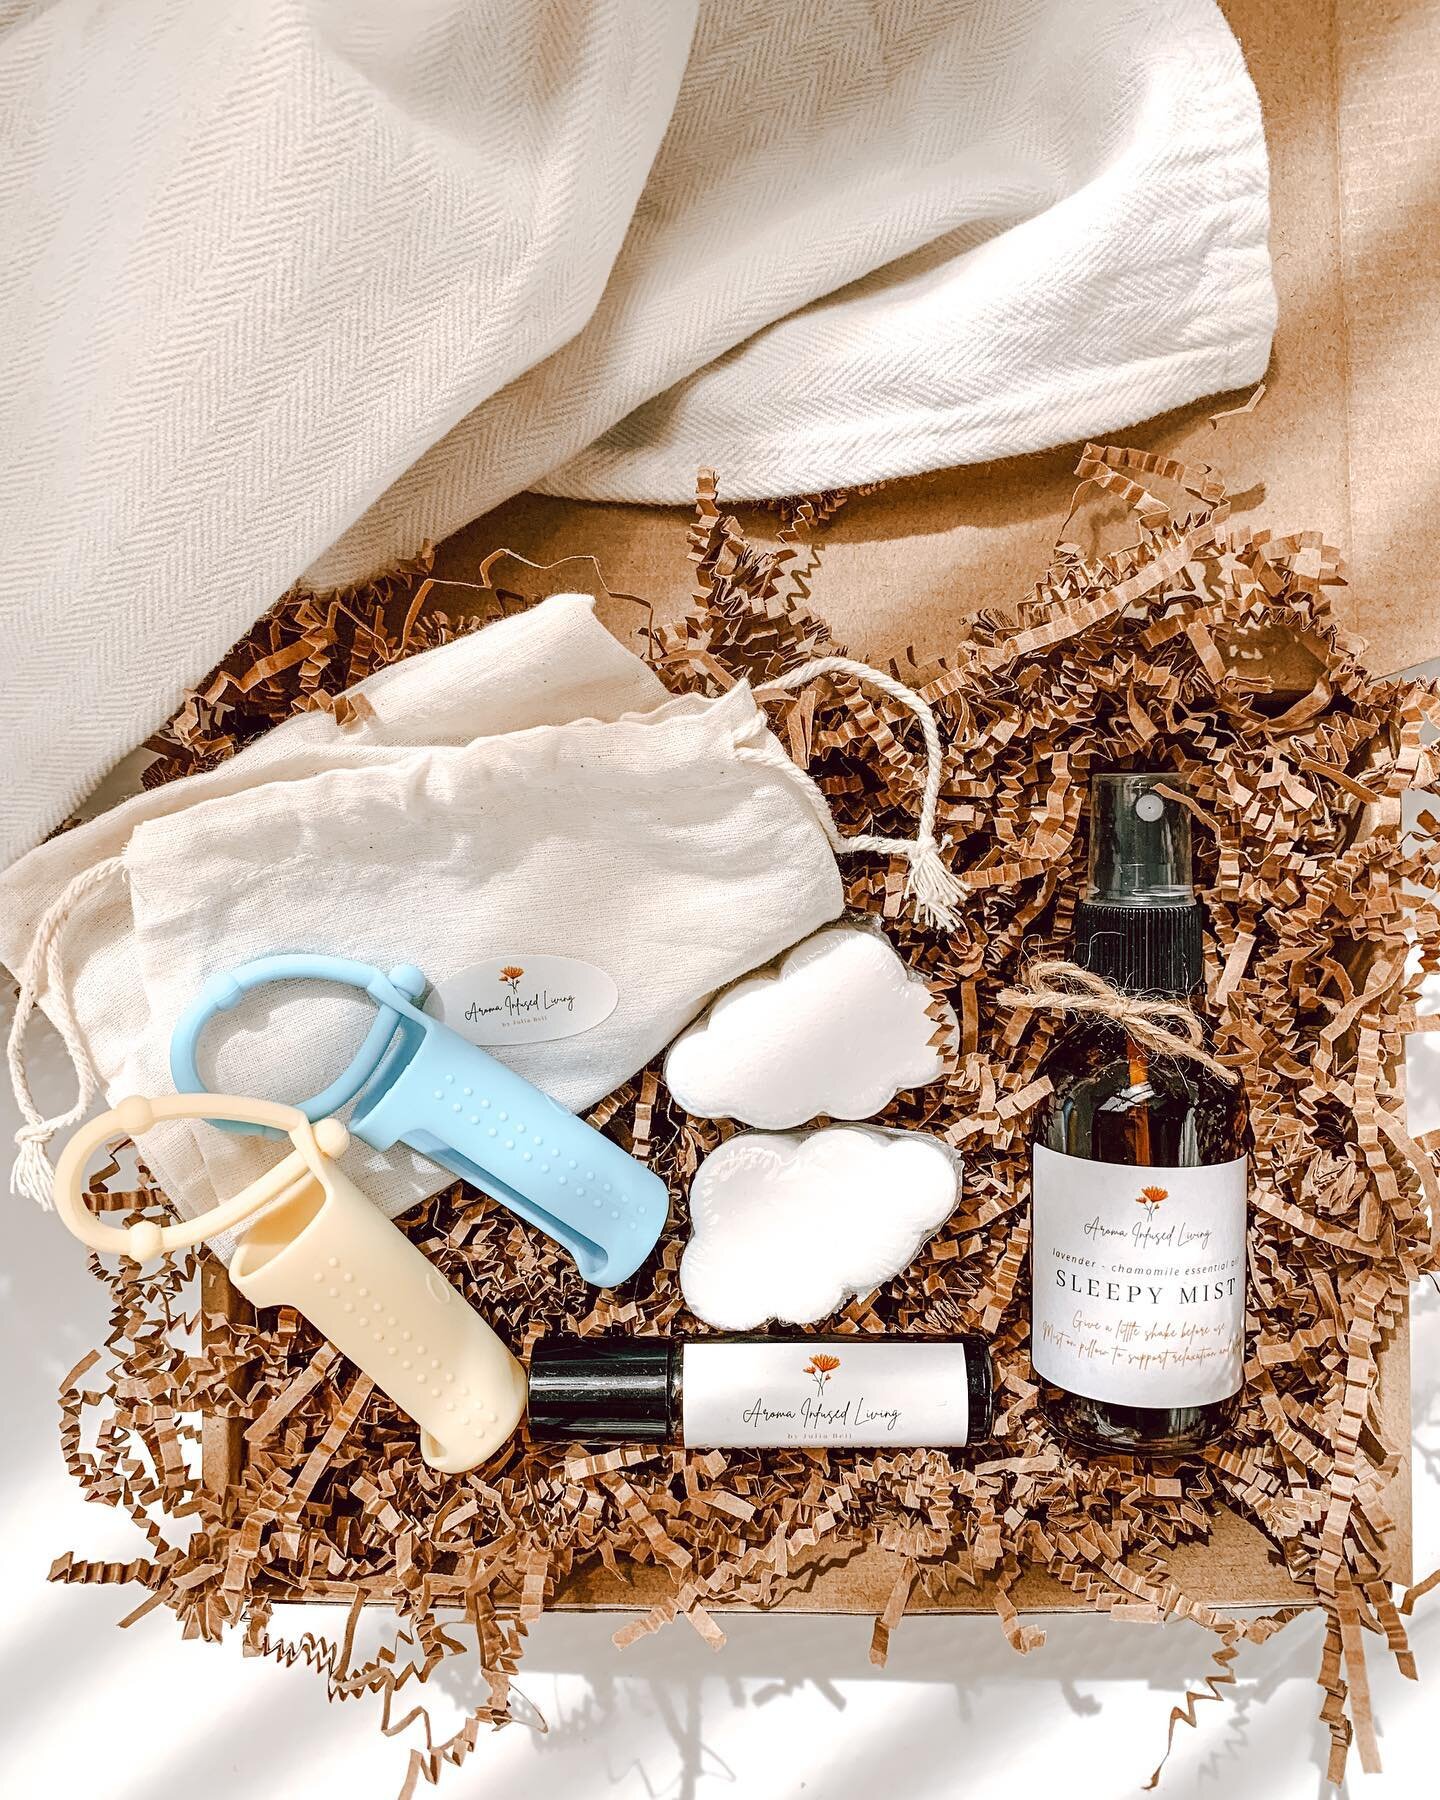 Natural Sleep Support 💤 

Or simply: naturally calm.

Did you know I offer an aromatherapy kids bundle that comes with the following: 

🌿 Sleepy | Calm Mist 
🌿 Calming Aromatherapy Roll-On
🌿 Your Choice of Roller Case
🌿 Calming &ldquo;Bath Cloud